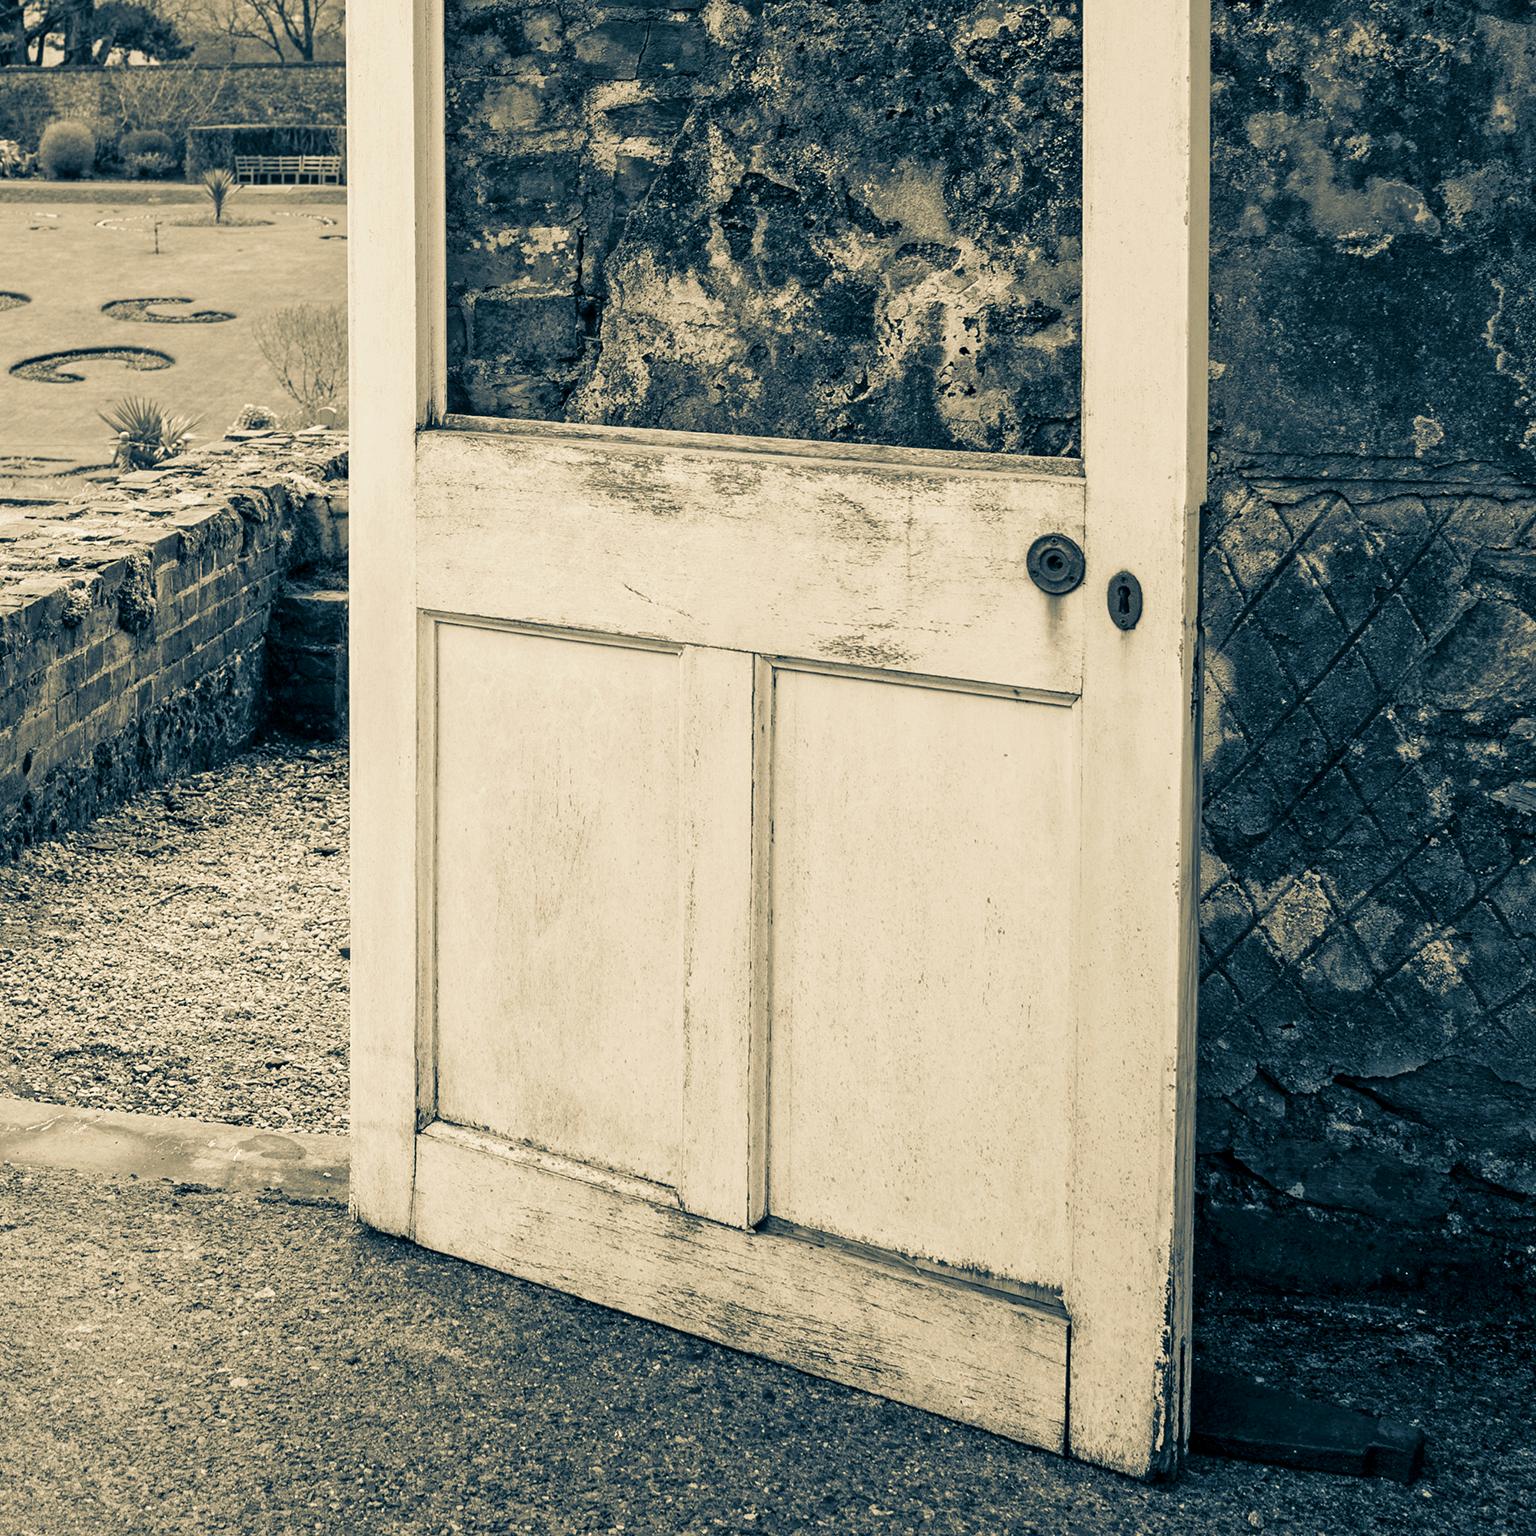 Victorian Garden, Kylemore Abbey, Ireland, 2018
Photograph by Cosmo Condina. The door to the secret Victorian Garden at Kylemore Abbey, Connemara, Ireland, 2018
Archival pigment print 19 X 12.6 in. Edition of 10. This is # 3/10 in the edition.

A